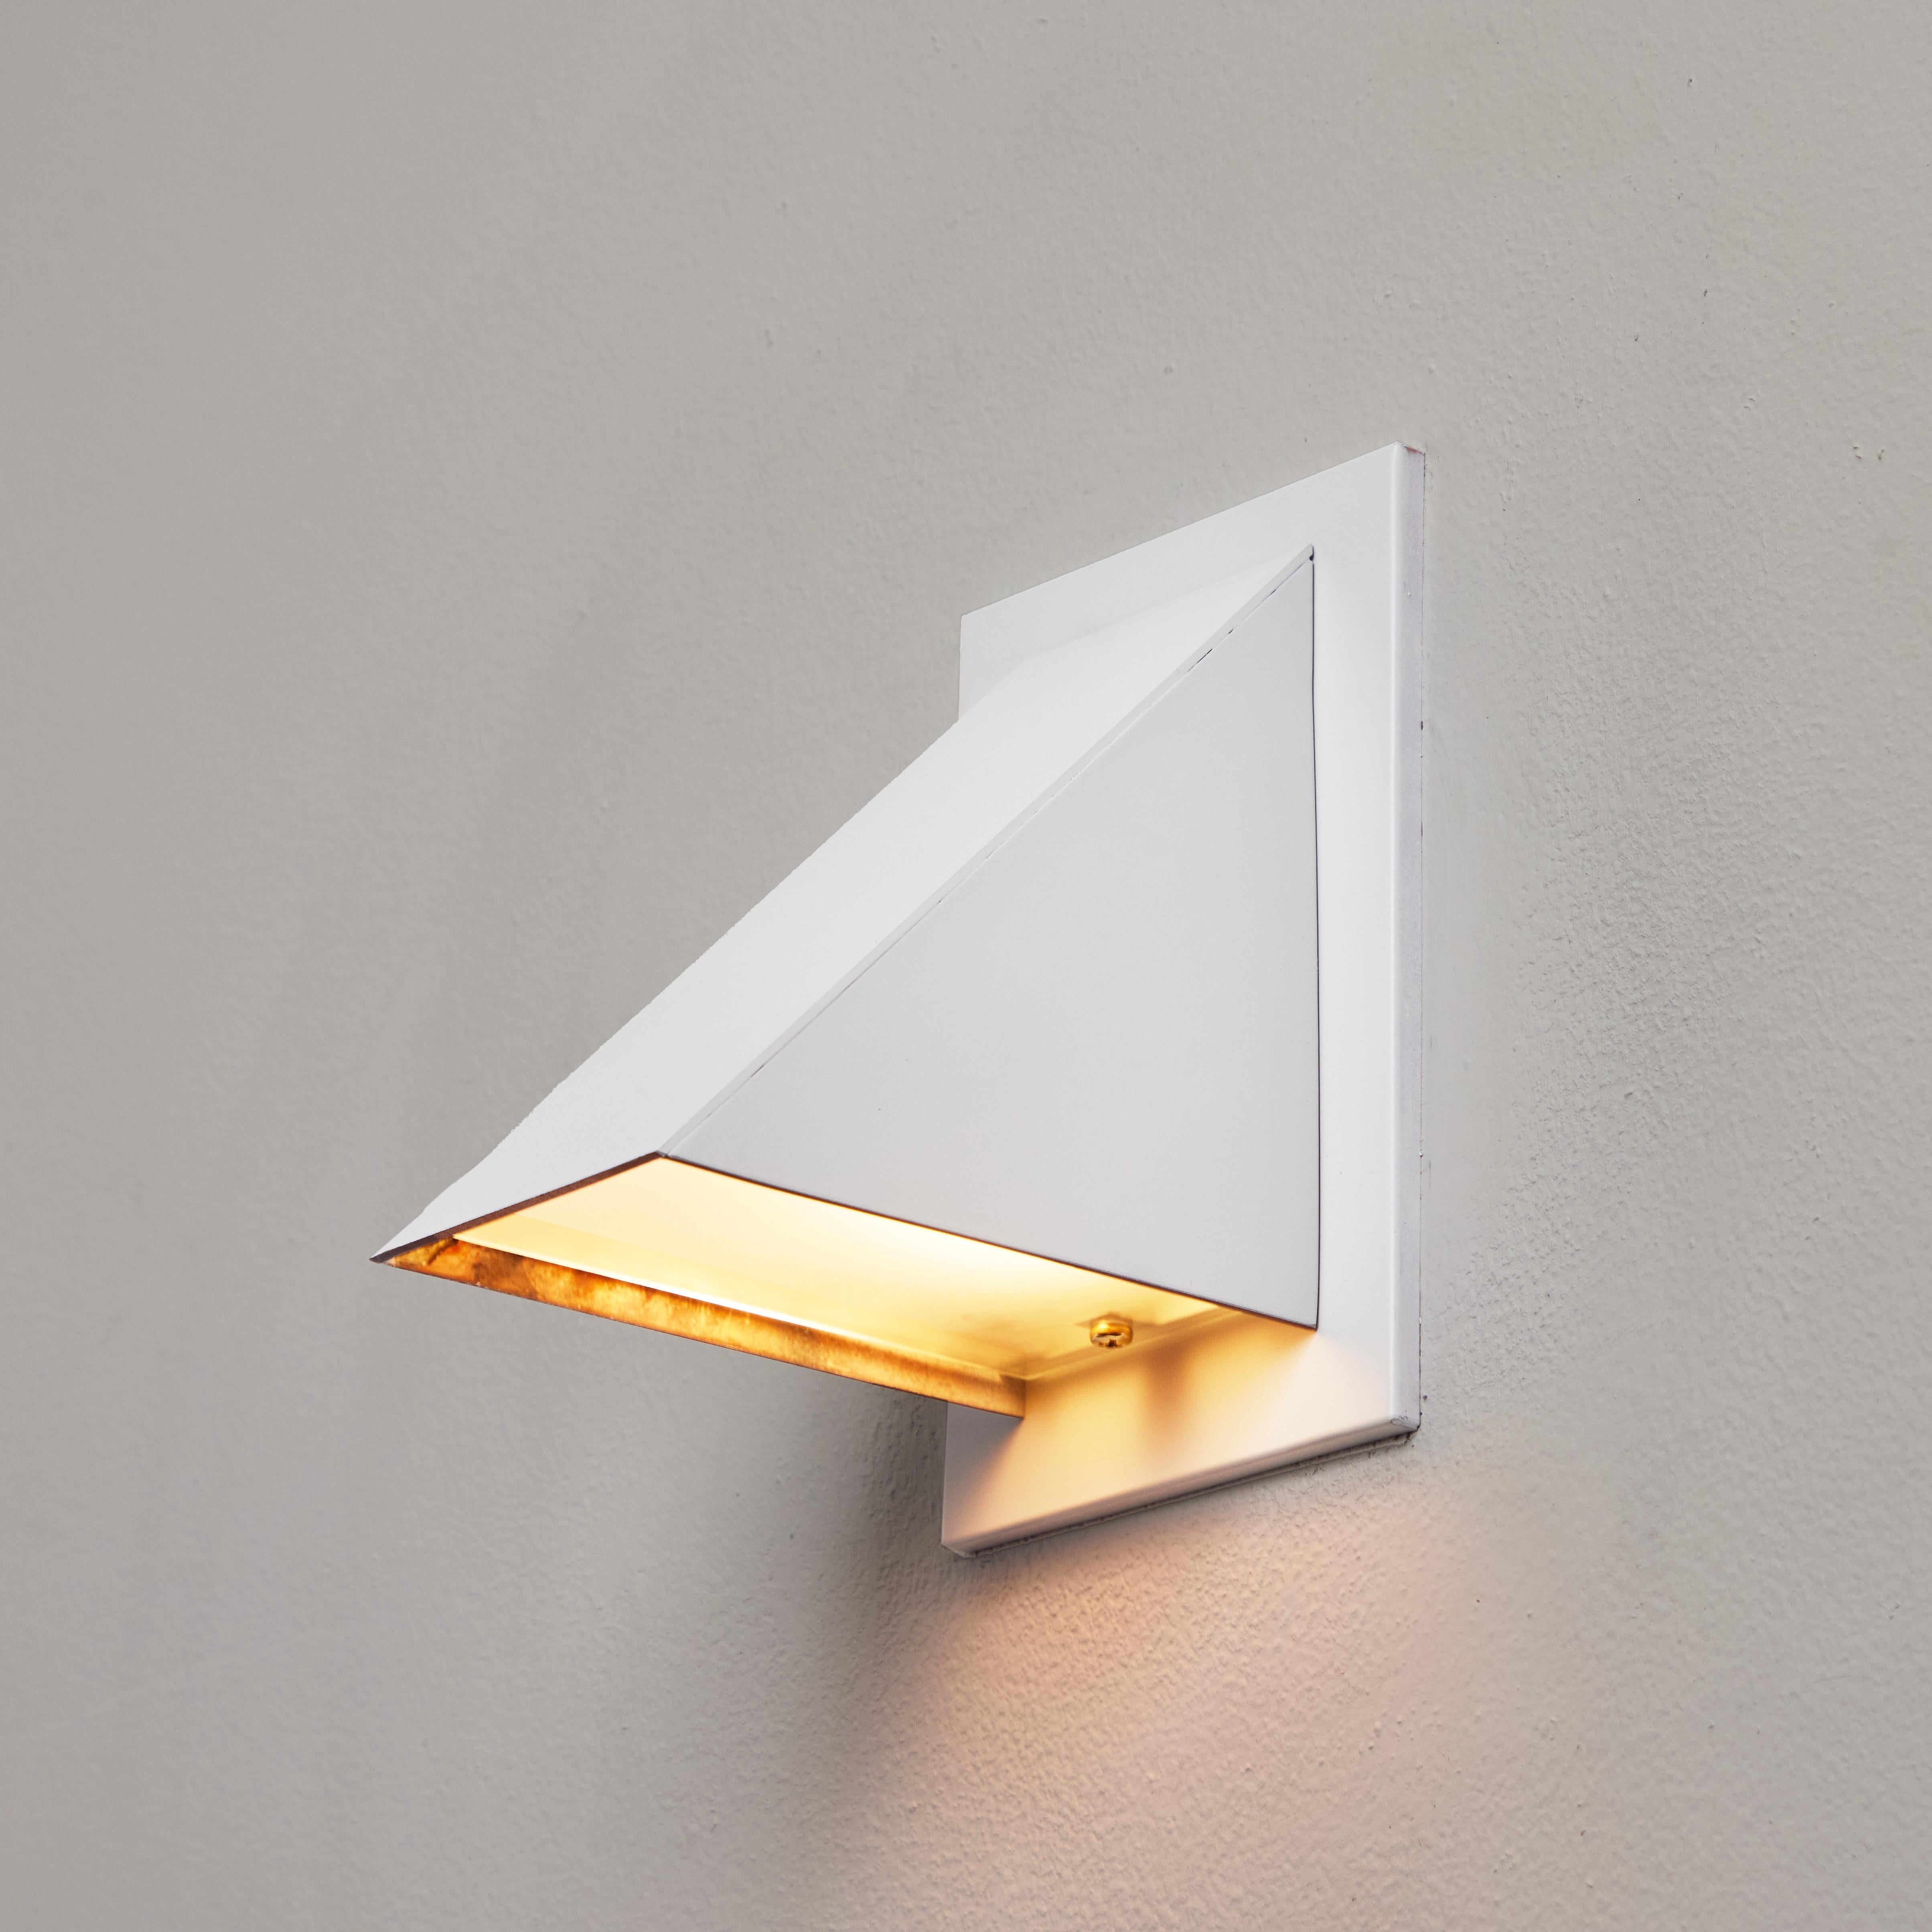 Pair of Jonas Bohlin 'Oxid' Wall Lights for Örsjö in White. Executed in white painted metal with an opaline glass diffuser. An incredibly refined and clean geometric design that is quintessentially Scandinavian. For indoor or outdoor use.

Price is